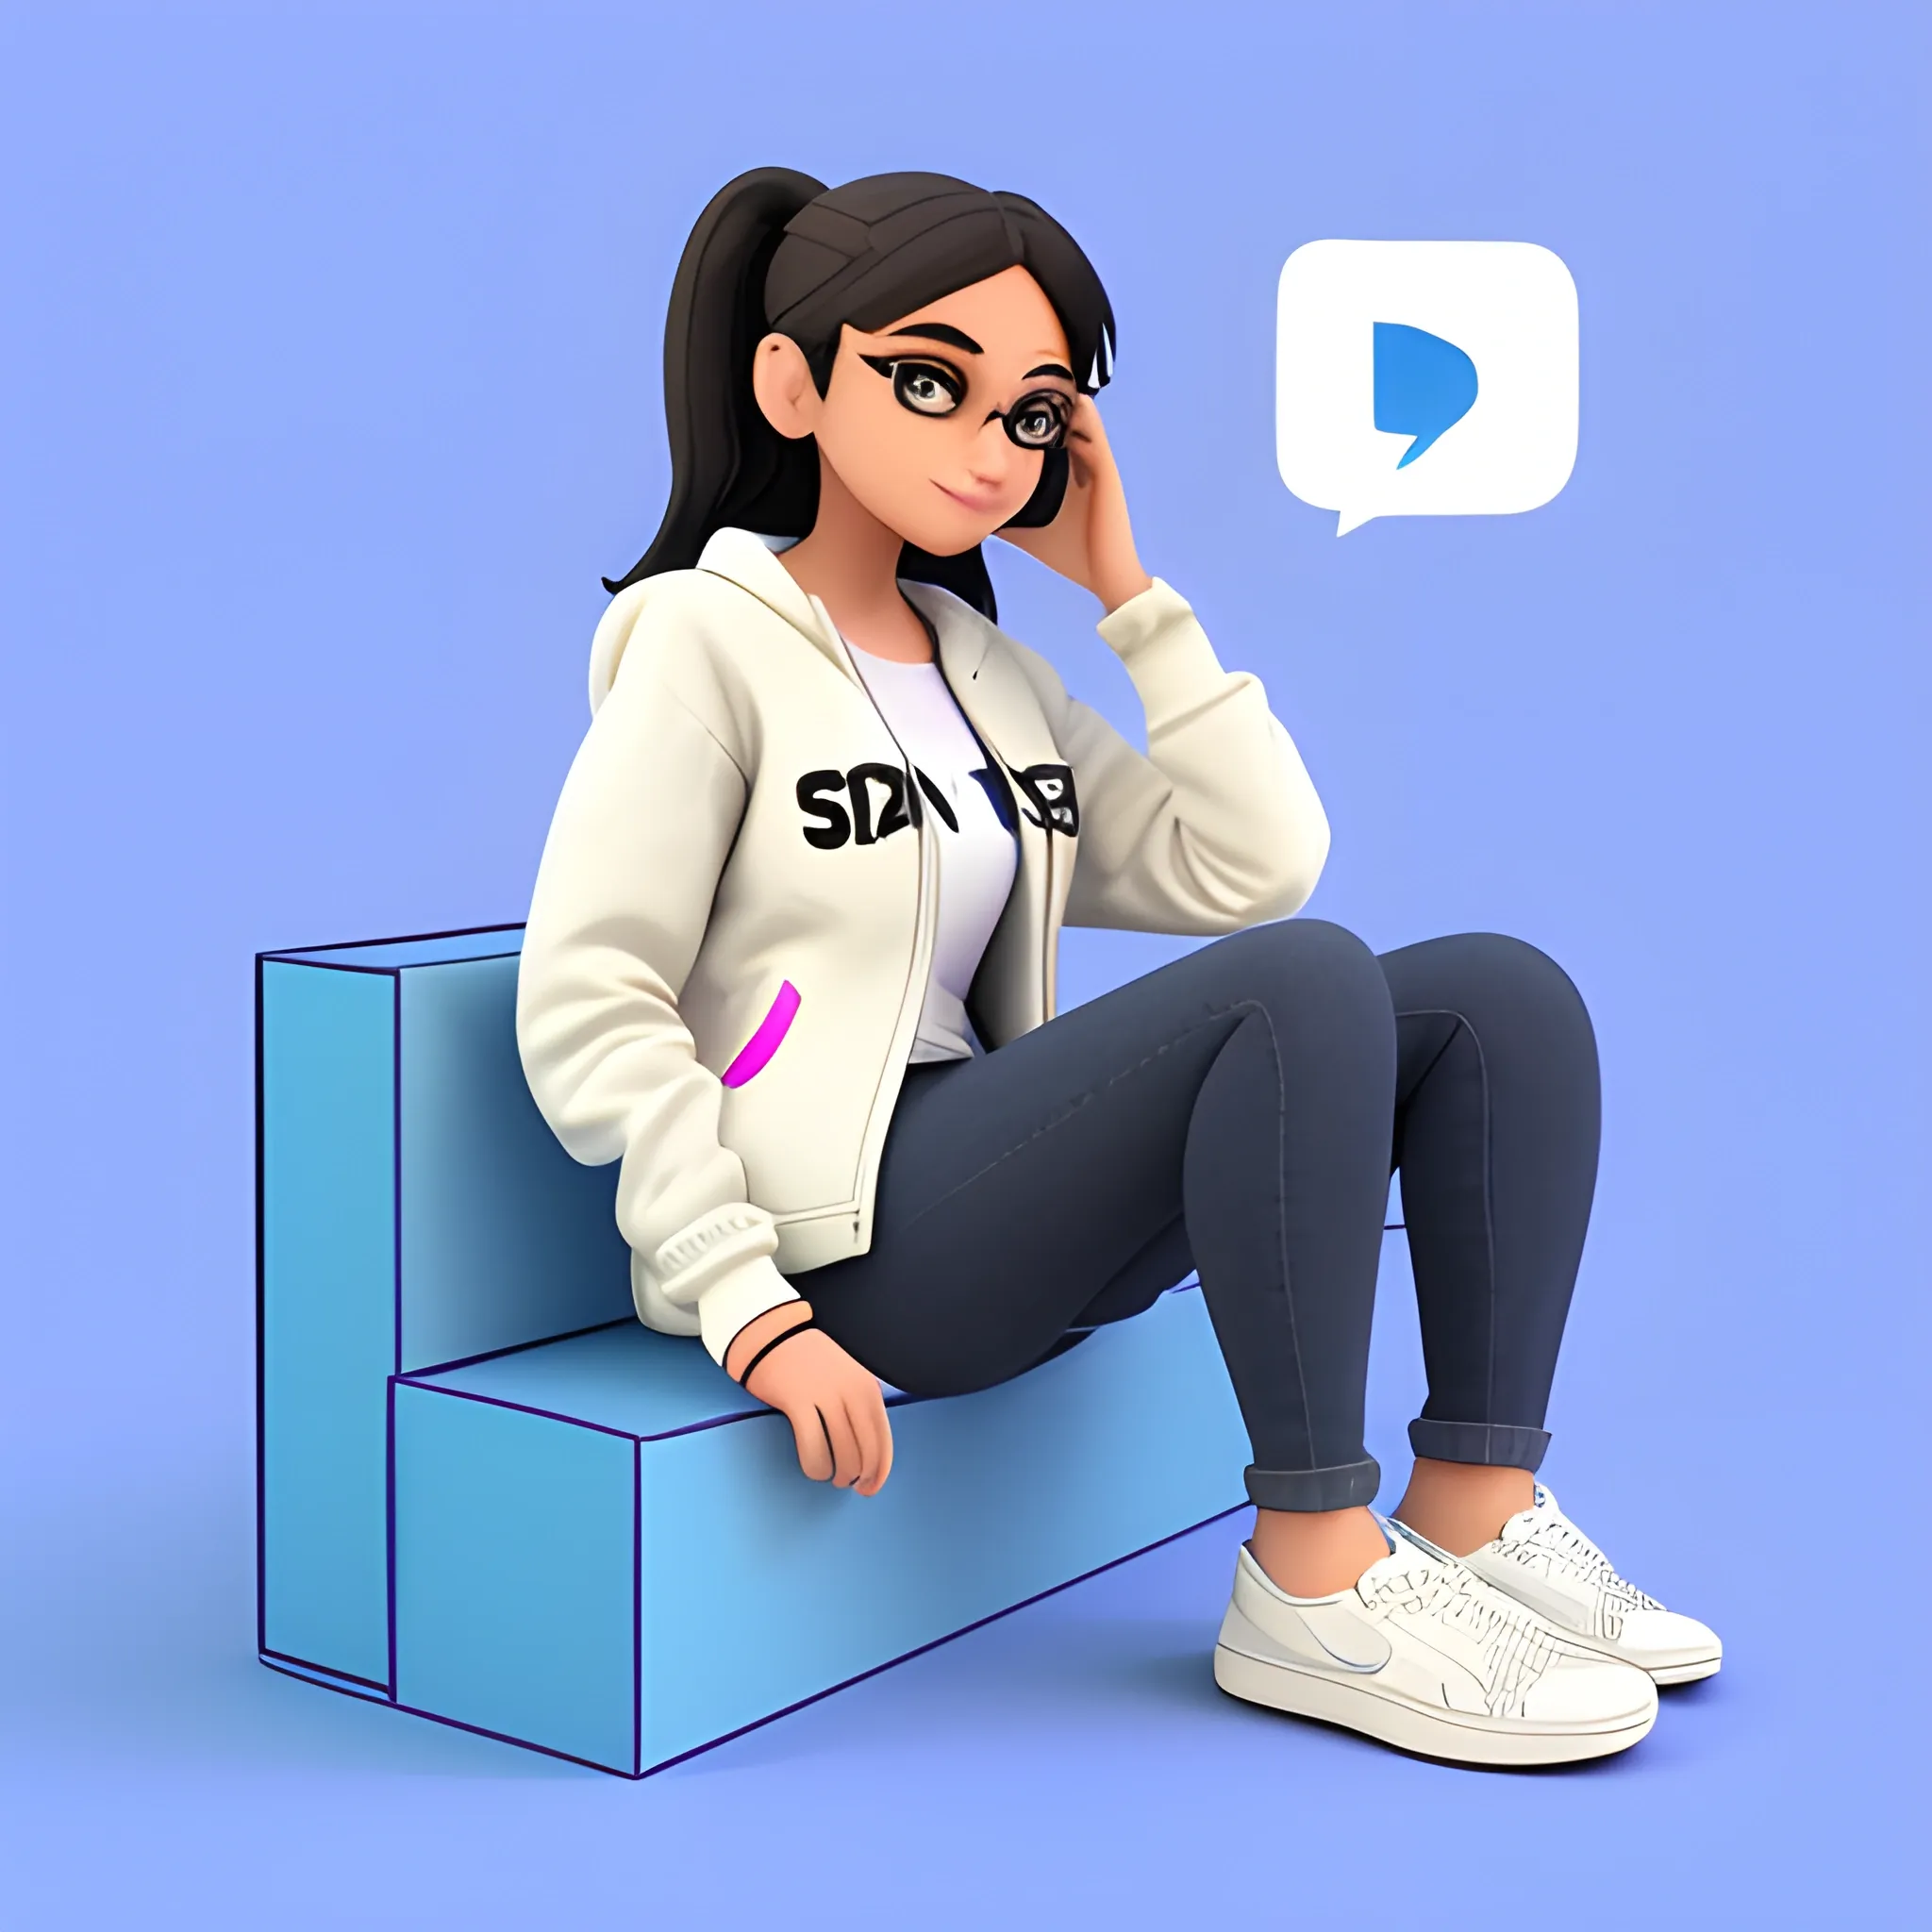 Create a 3D illustration of an animated character sitting casually on top of a social media logo "Instagram".A female character.The character must wear casual modern clothing such as jeans jacket and sneakers shoes. The background of the image is a social media profile page with a user name "Itz_s_neha07" and a profile picture that match.